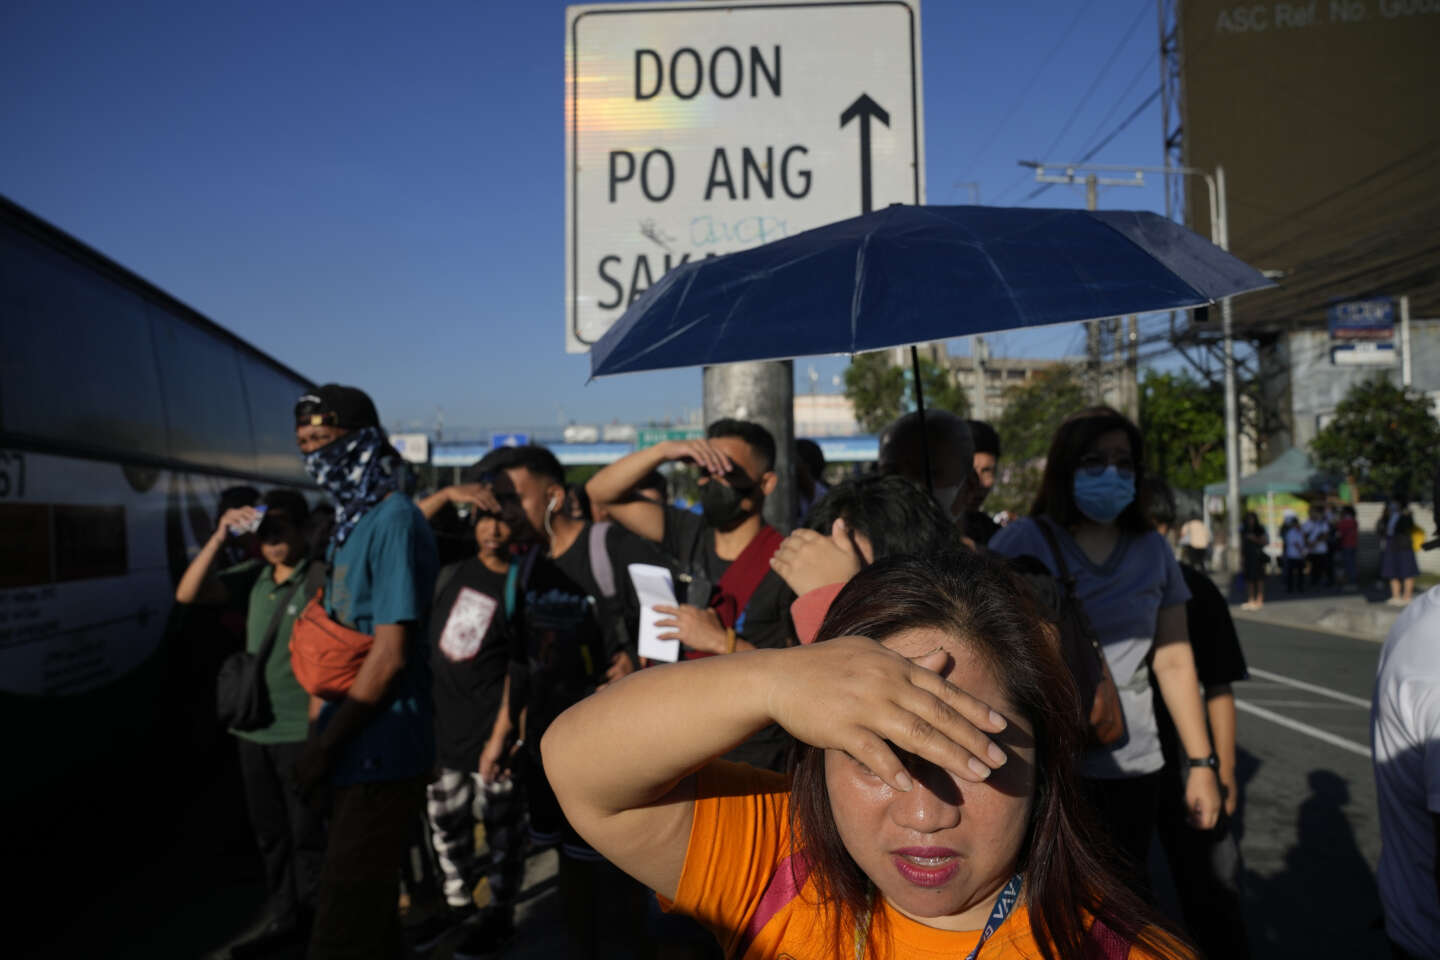 Southeast Asia has been hit by a severe heat wave